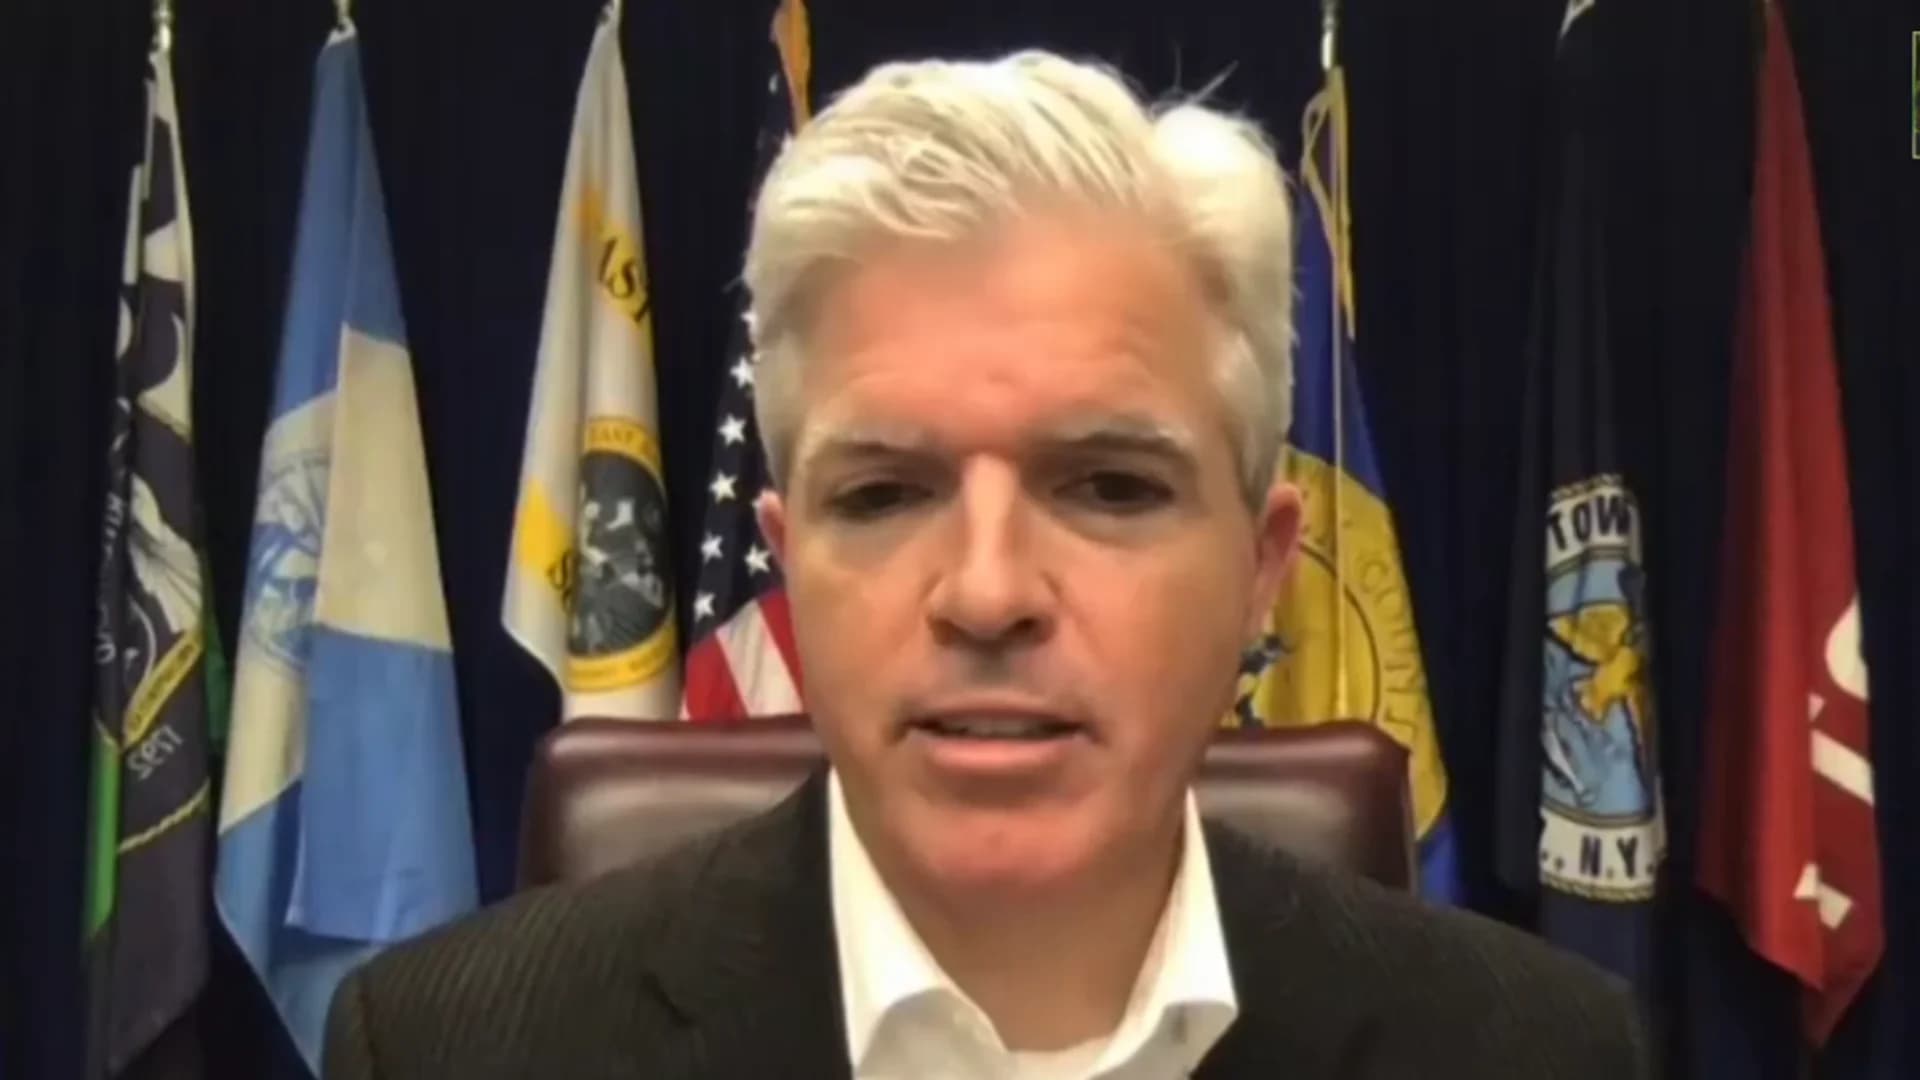 Bellone: Federal government telling states to bear burden of COVID-19 is 'unacceptable'